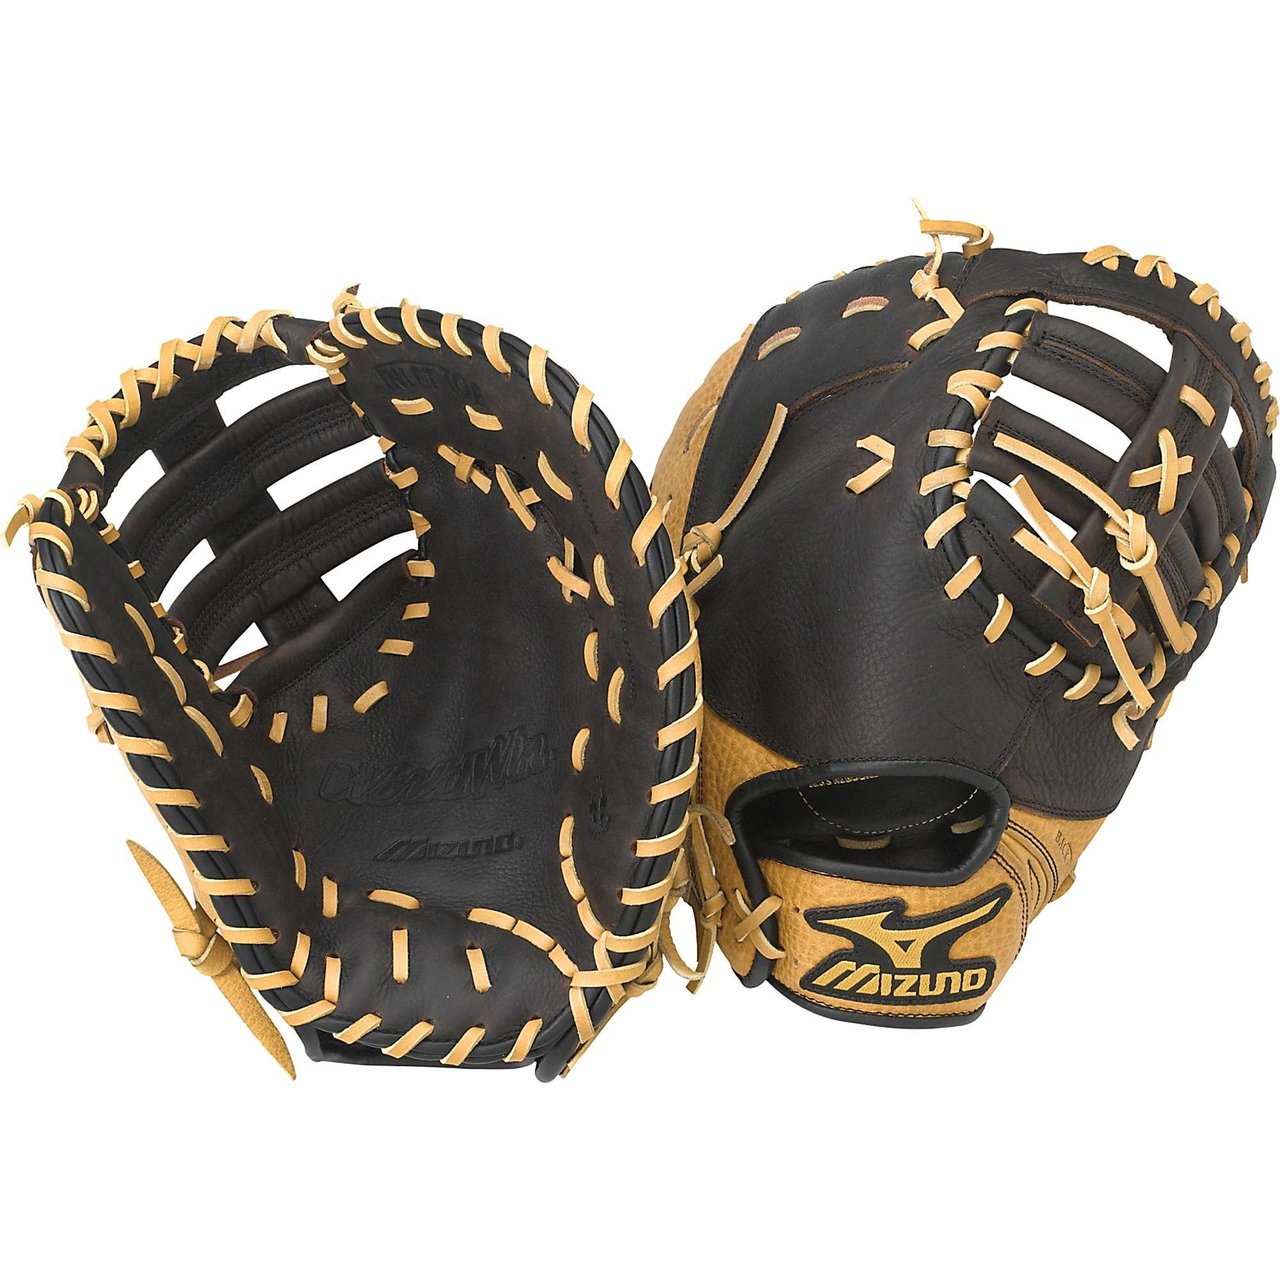 Mizuno has firstbase mitts to meet the needs of any level player. From the glove easy to close for youth players, all the way up to Pro Level mitts trusted by MLB greats such as Todd Helton, Mizuno firstbase mitts offer unmatched protection, fit, and performance